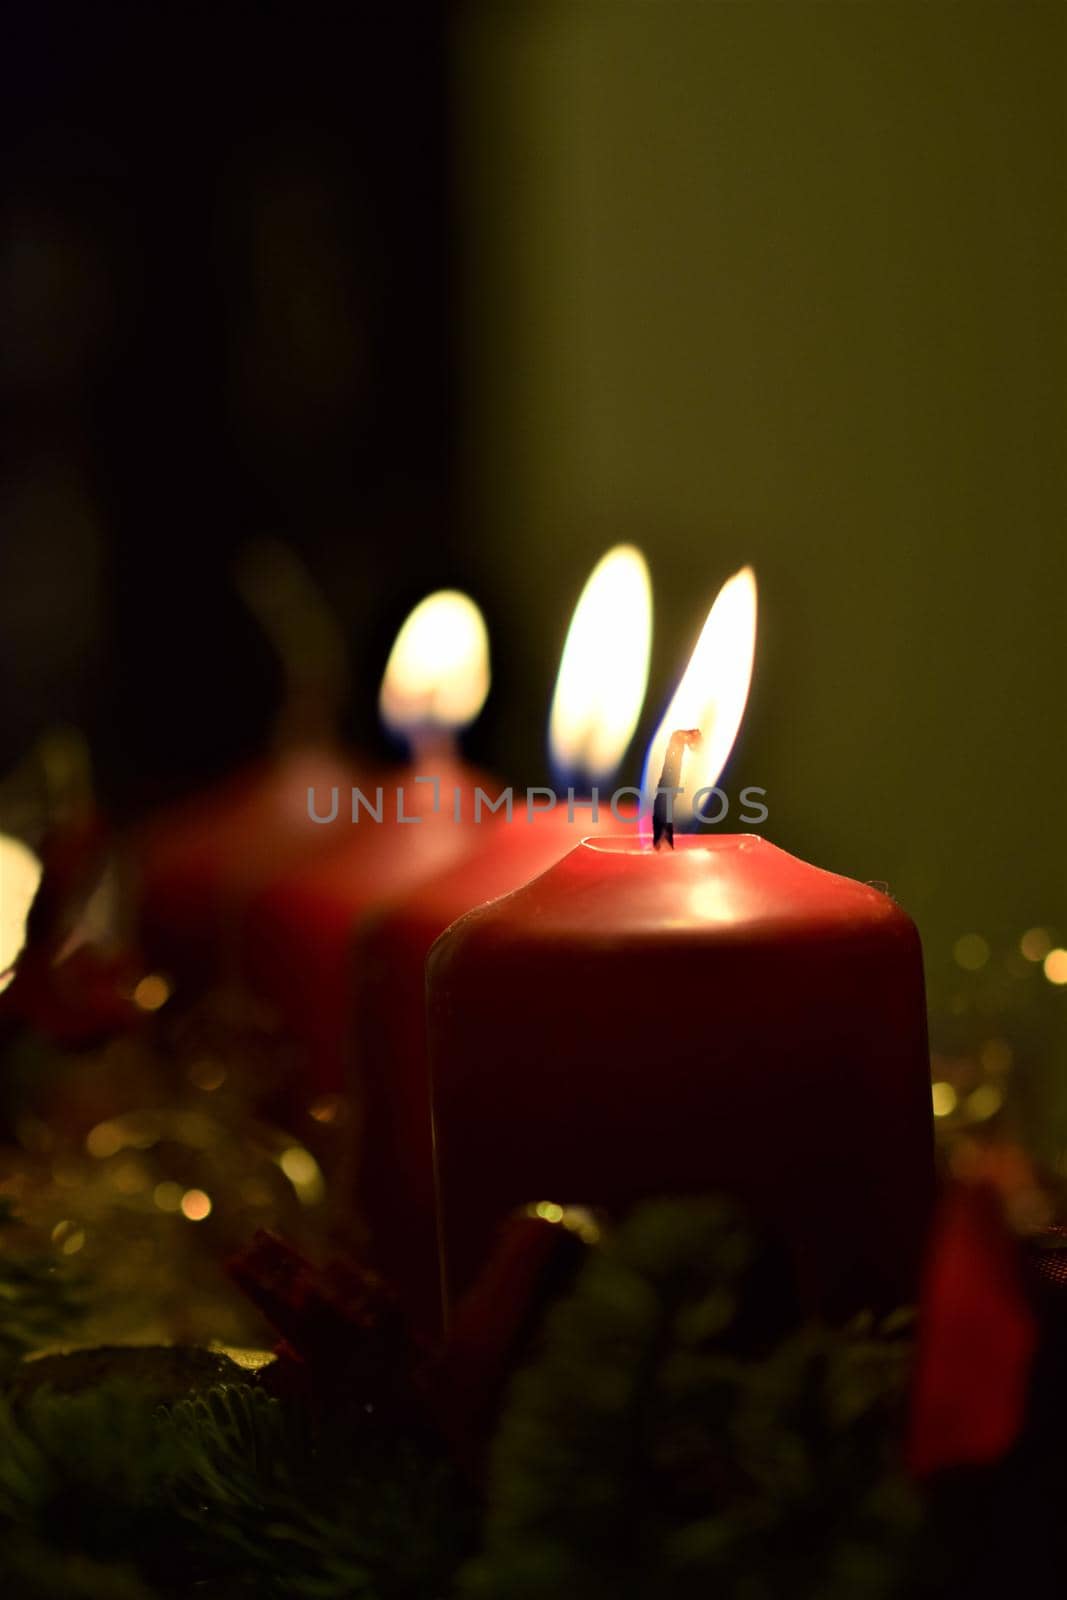 close up of an Advent arrangement with three burning candles by Luise123